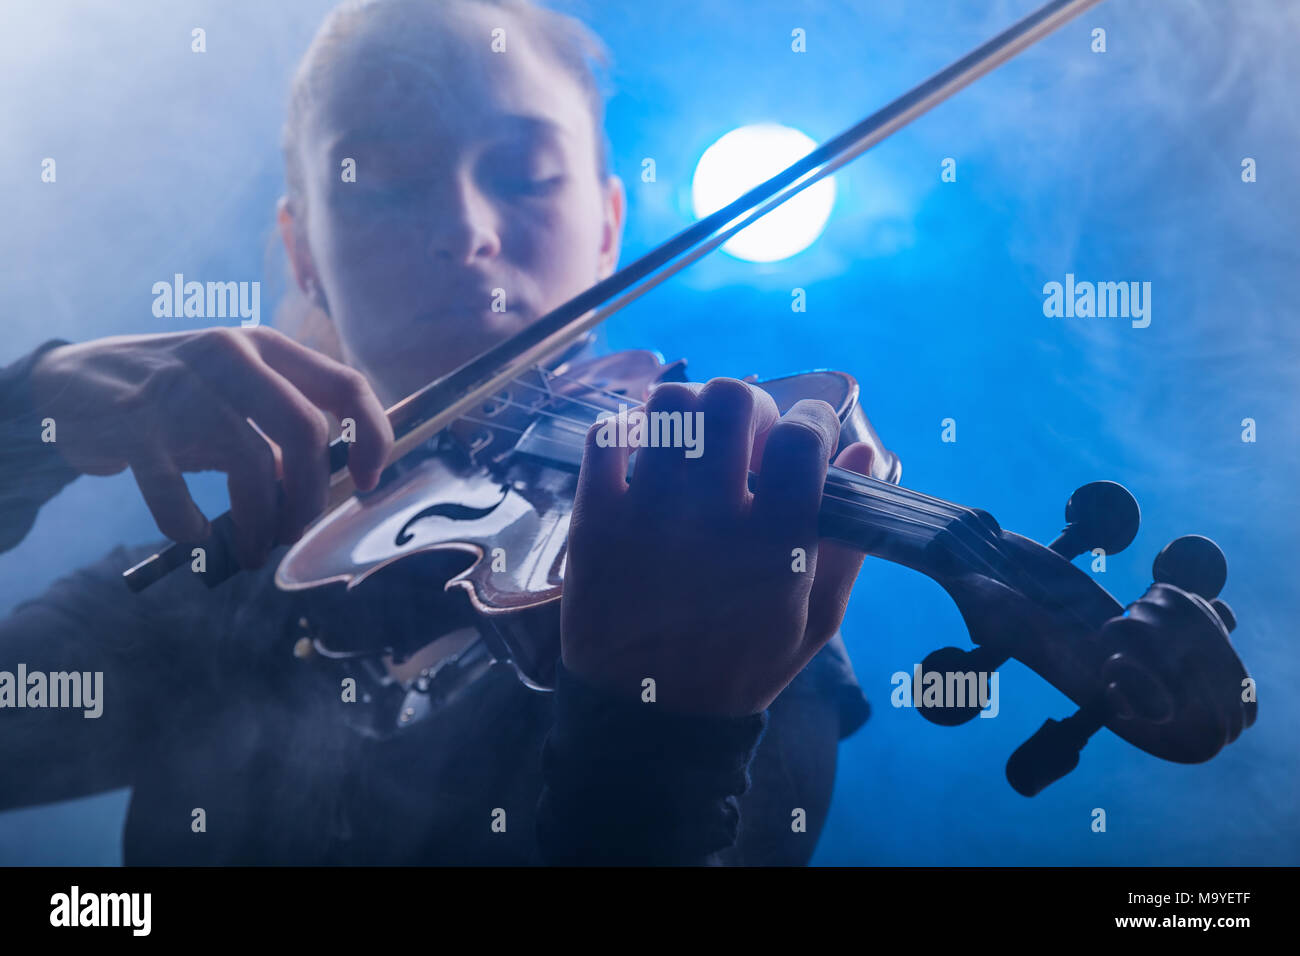 Woman playing the violin against a dark background. Fog in the background. Studio shot Stock Photo